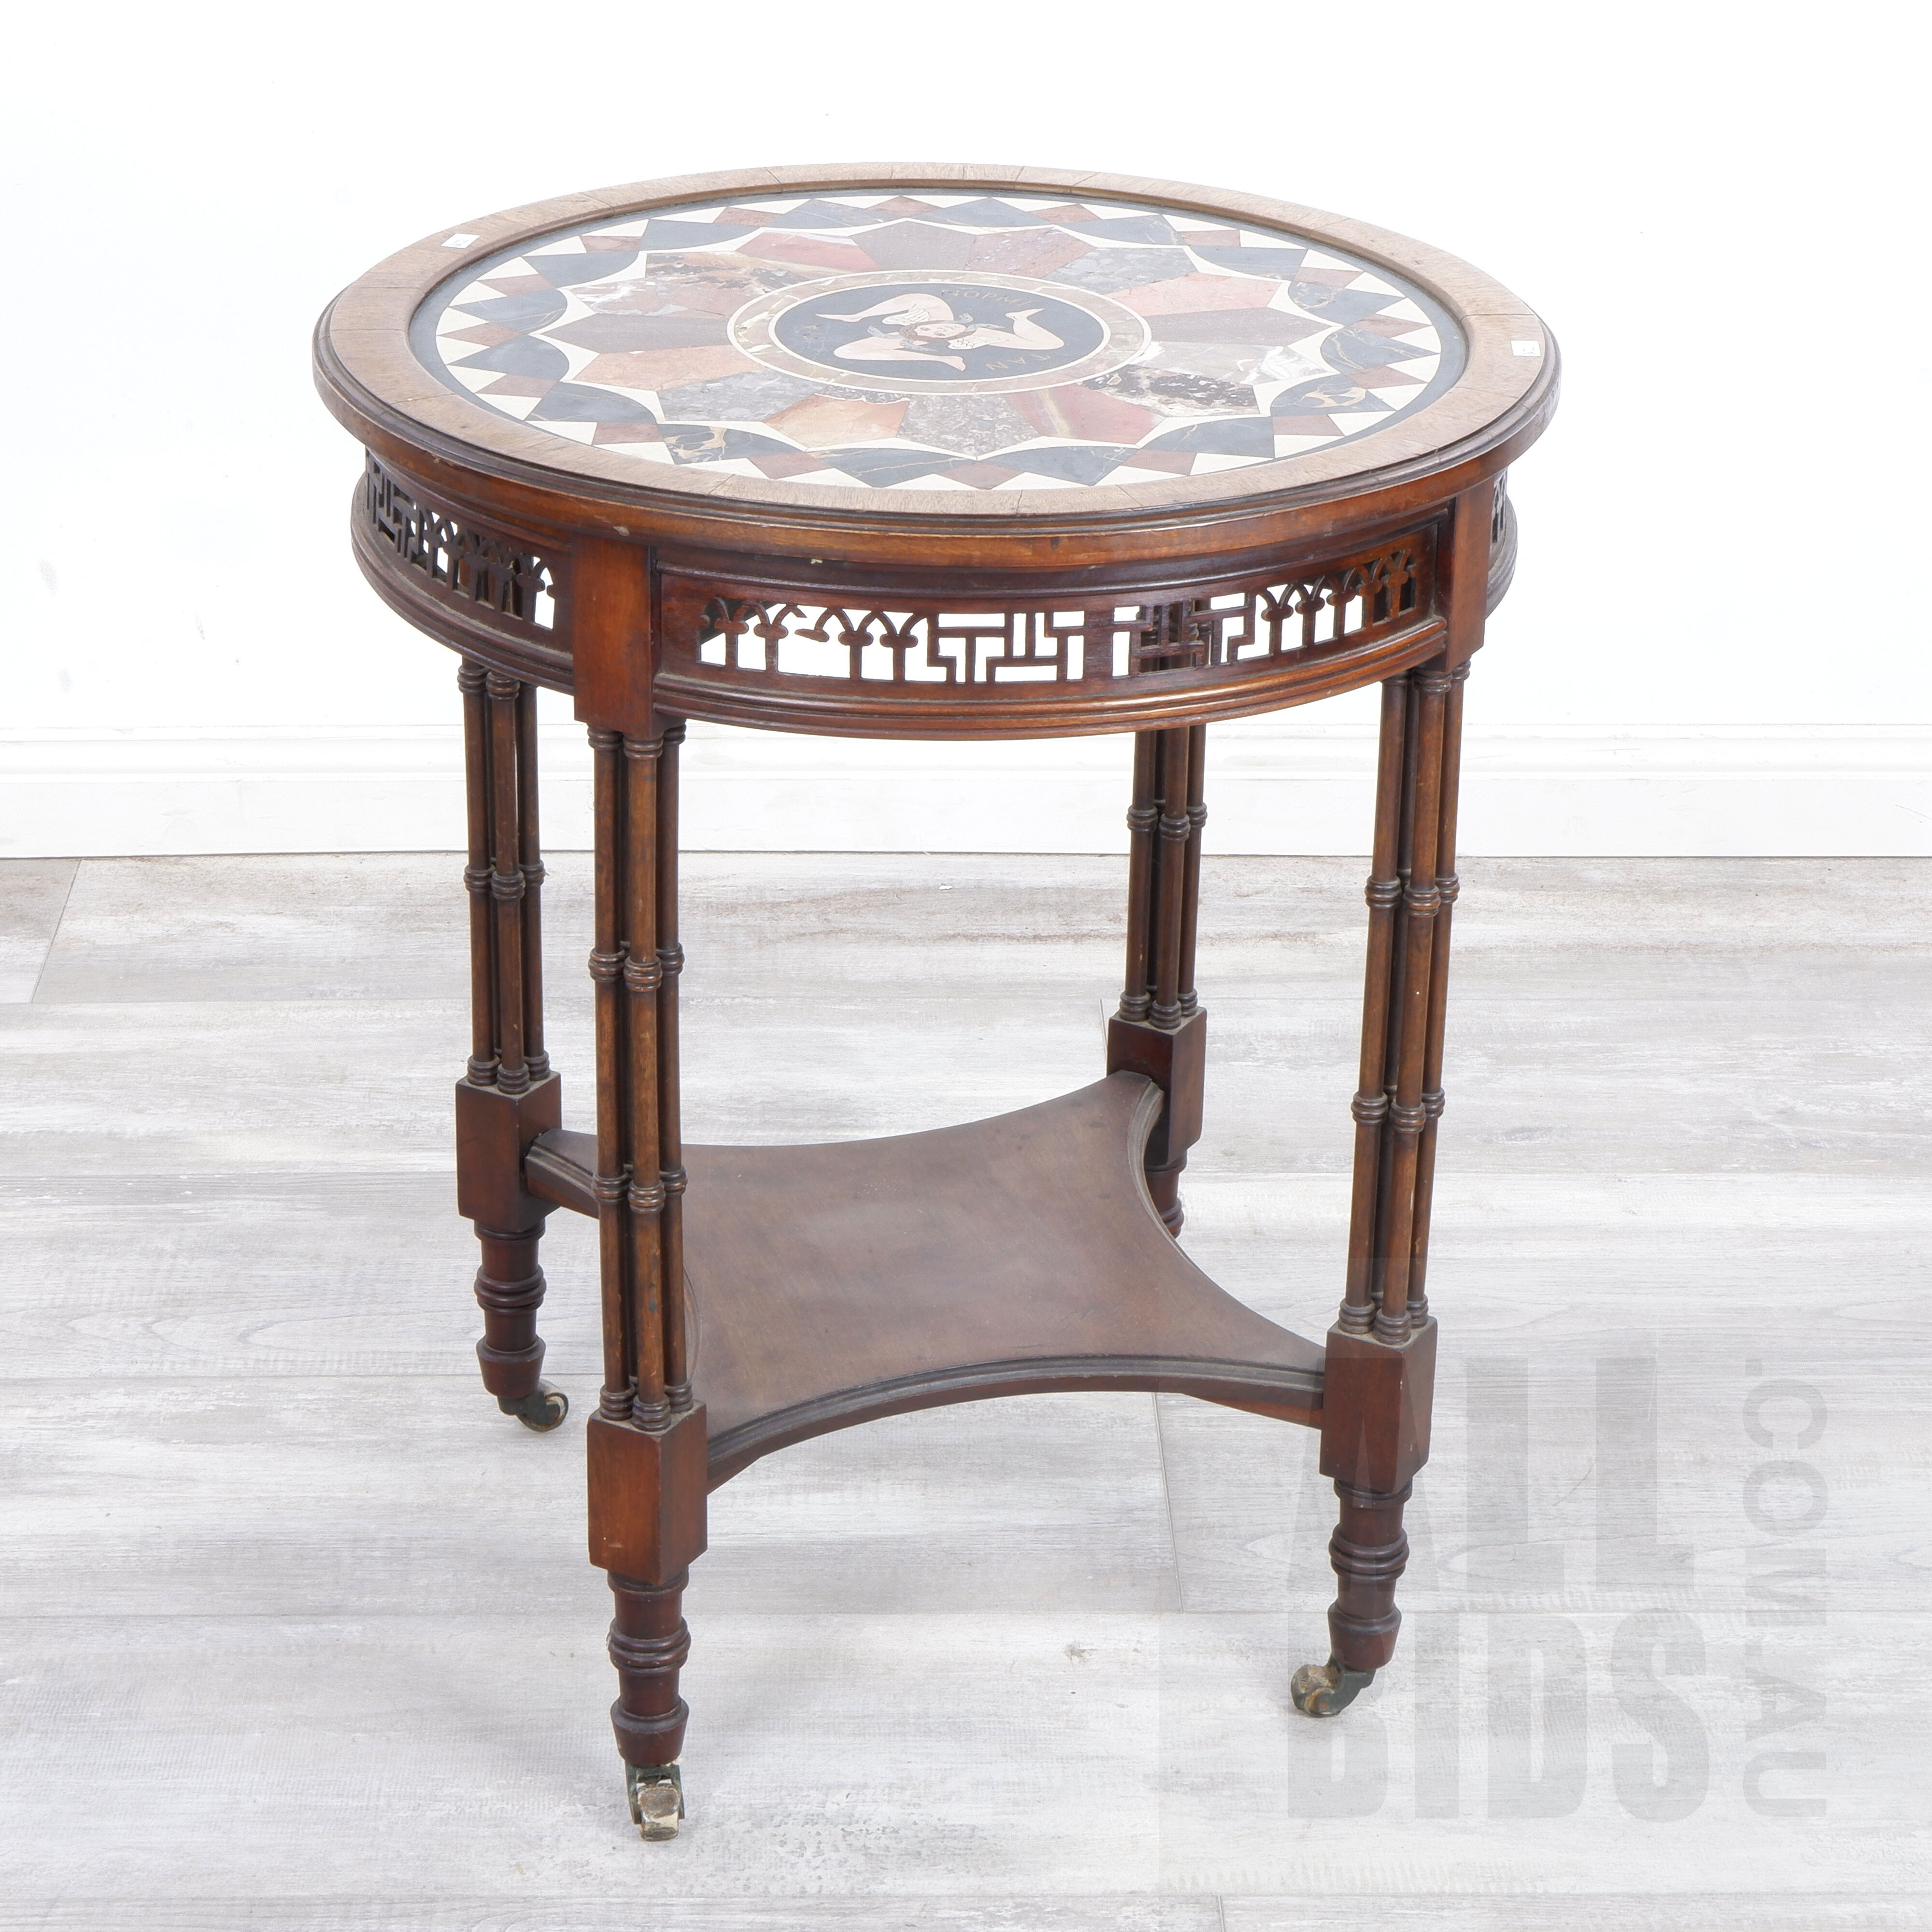 'Victorian Mahogany Wine Table in the Chippendale Style with Italian Pietra-Dura Top Inlaid with the Trinacria and Inscription, Late 19th Century'